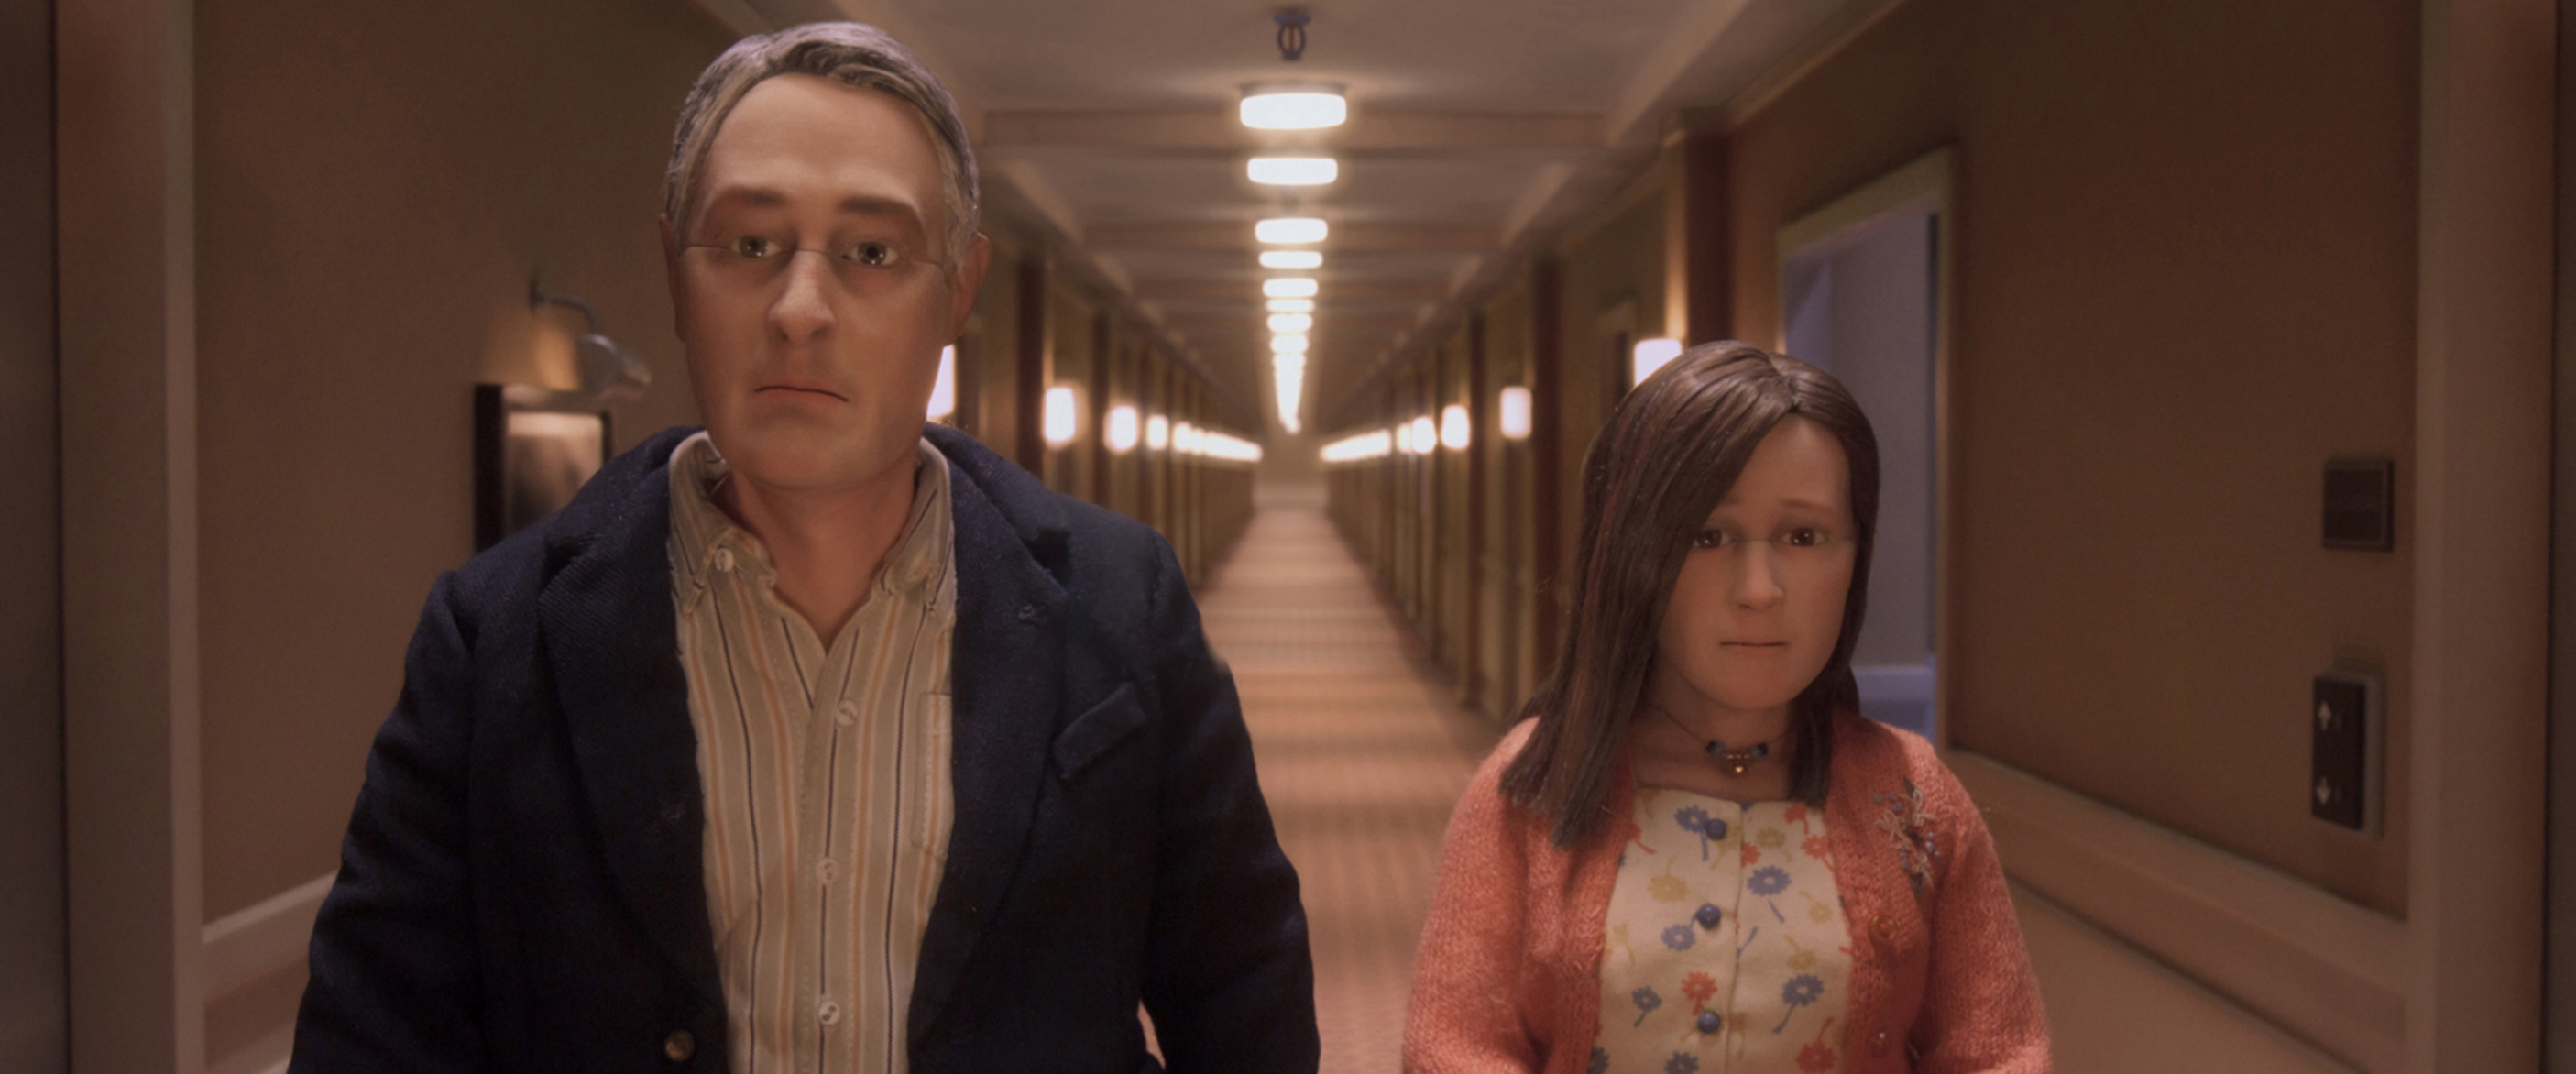 David Thewlis voices Michael Stone and Jennifer Jason Leigh voices Lisa in <i>Anomalisa</i>. (Paramount Pictures)